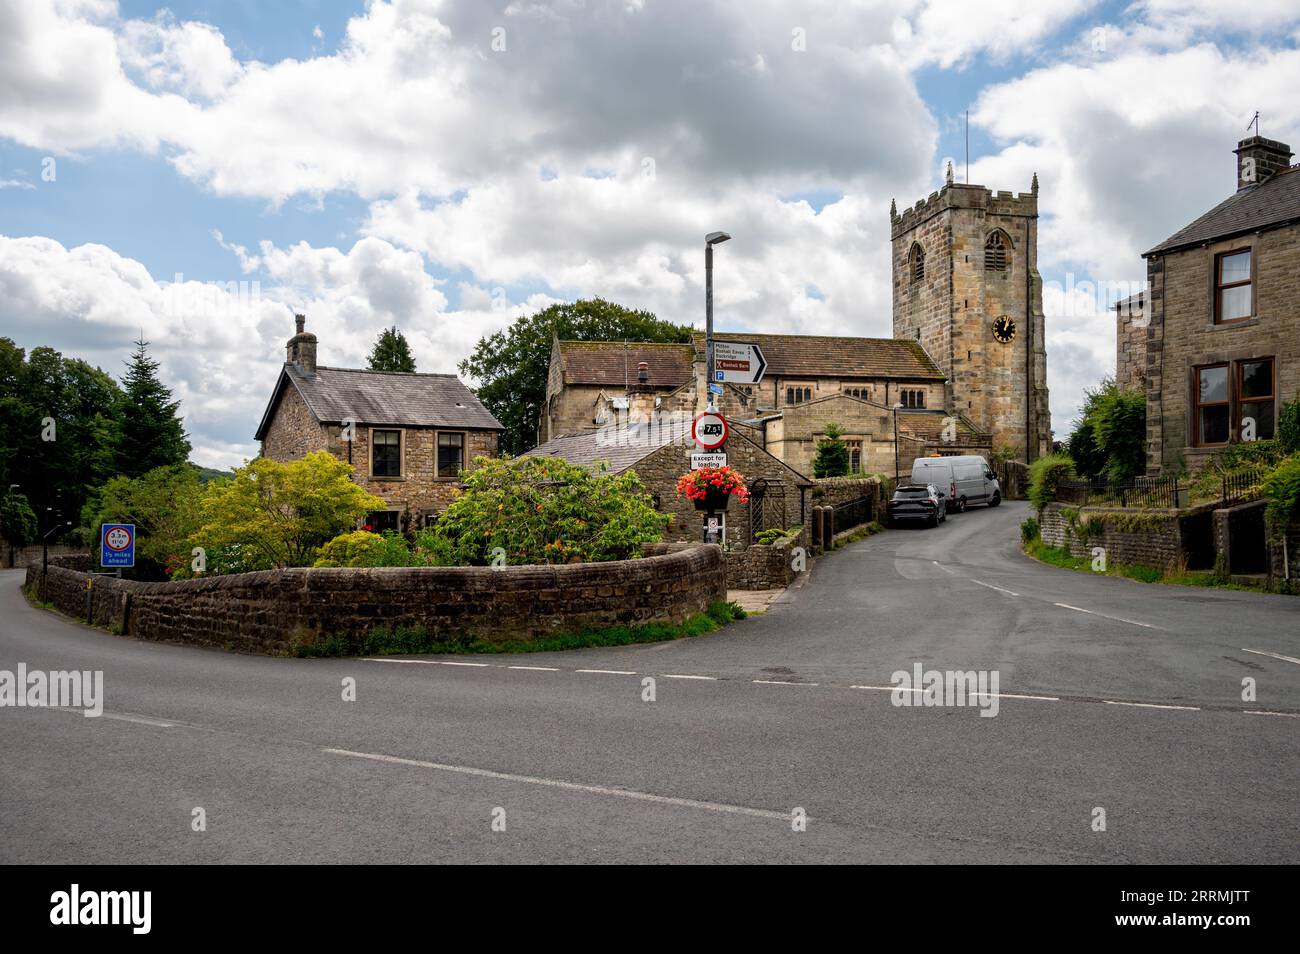 Waddington is a small village, 2 miles (3 km) north-west of Clitheroe in the Ribble Valley, Lancashire, England. Stock Photo